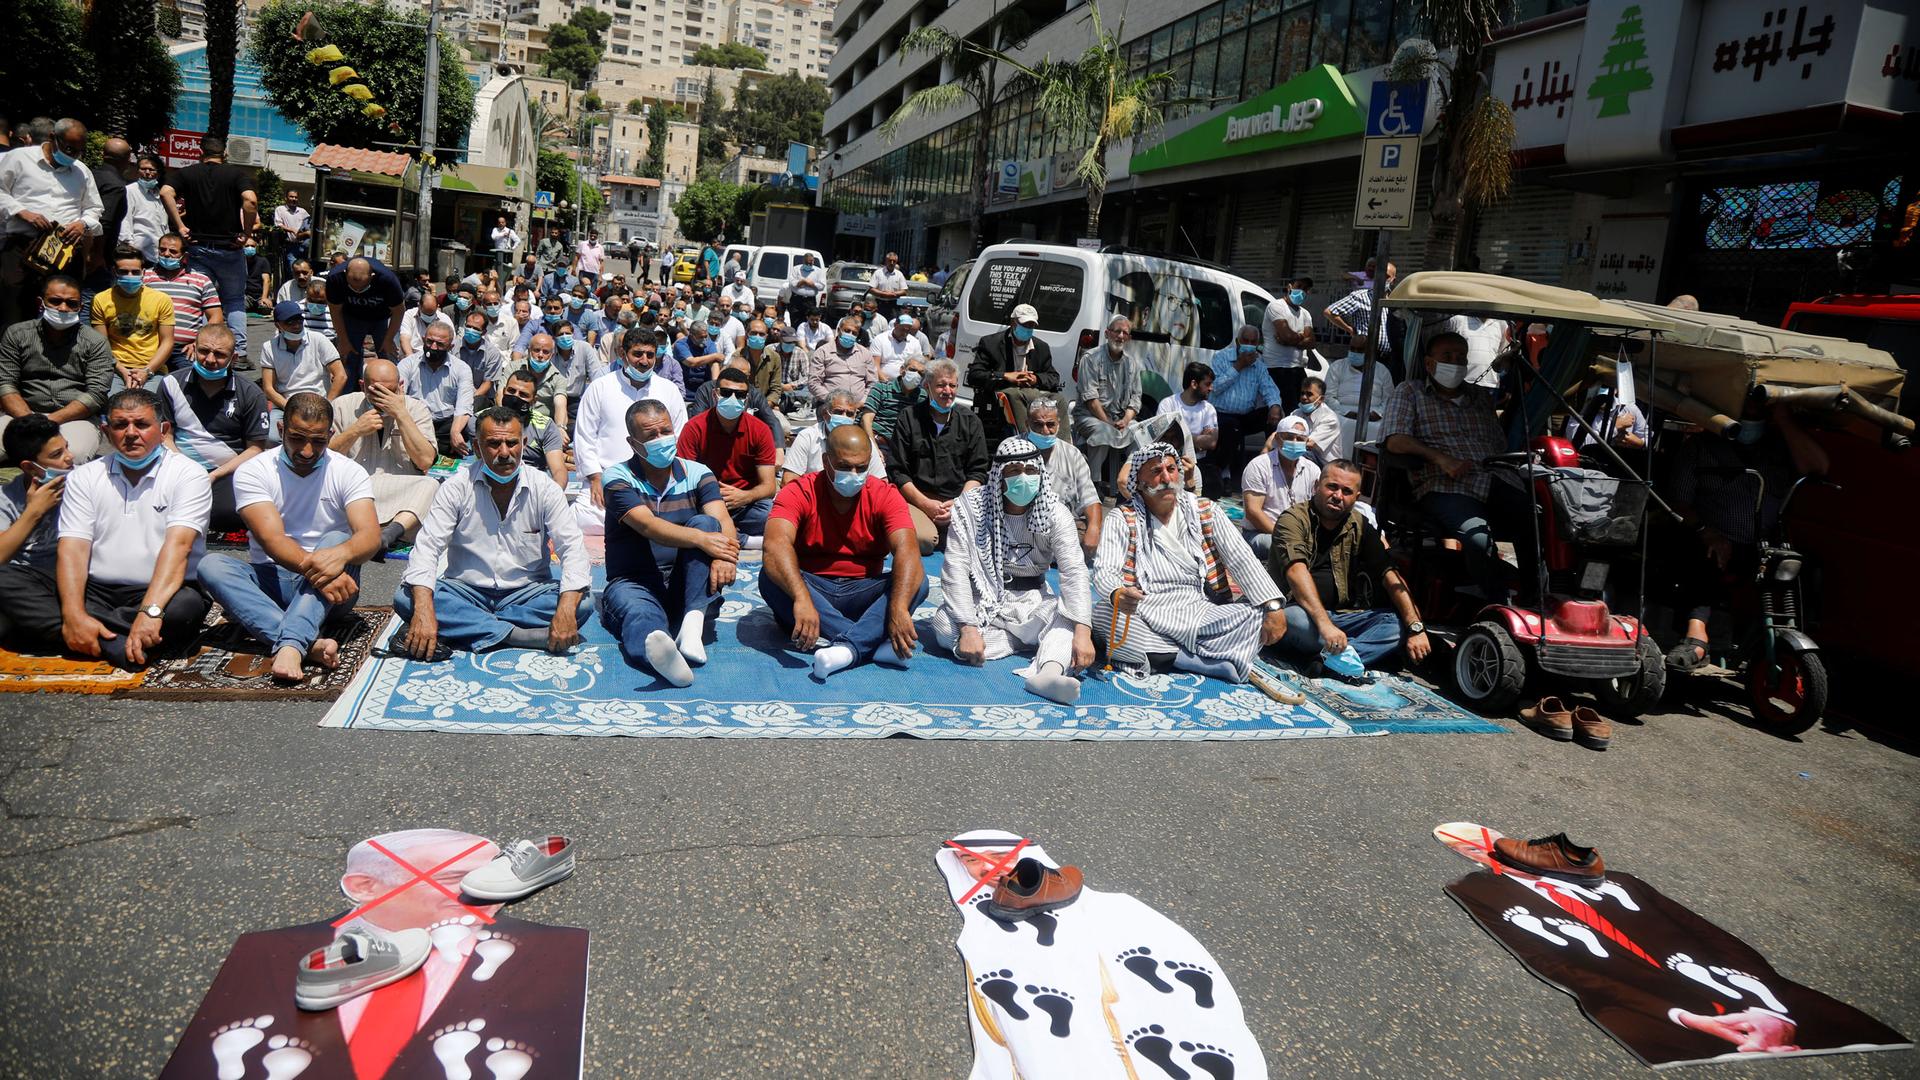 A large group of men are shown sitting in a street with cardboard cutouts of President Donald Trump and Abu Dhabi Crown Prince Mohammed bin Zayed al-Nahyan and Israeli Prime Minister Benjamin Netanyahu lay on the ground in front of them with shoes placed.